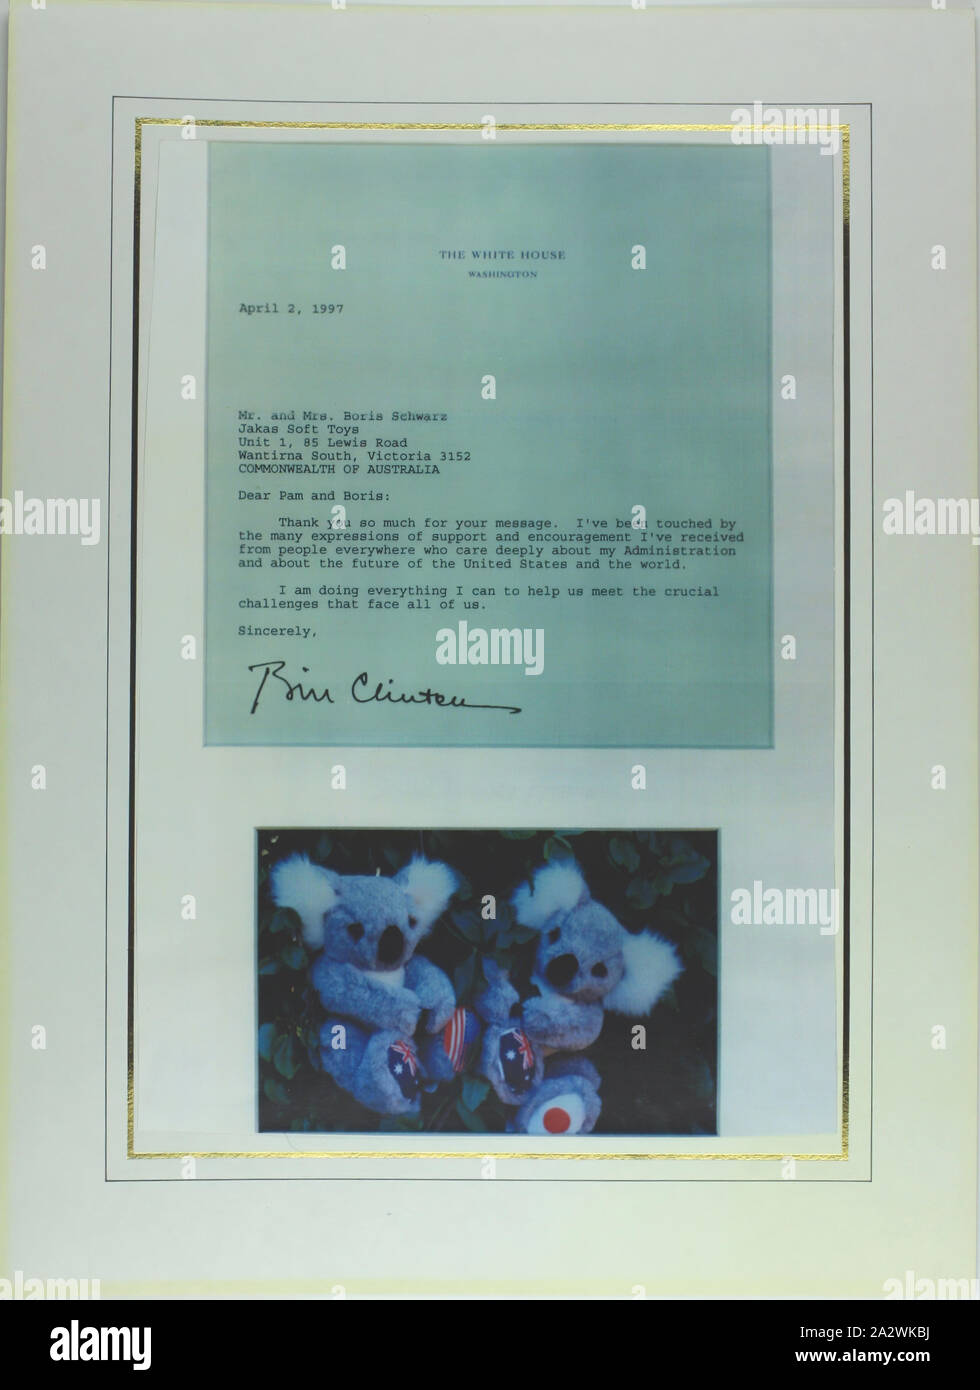 Letter - Jakas Soft Toys, Melbourne, 1997, Mounted photocopy of a letter from U.S. President Bill Clinton, dated 2 April 1997, to Mr and Mrs Boris Schwarz thanking them for their message of support. Jakas Soft Toys was a Melbourne-based company which designed and manufactured genuine high quality soft toys from 1956. Their designs included a range of teddy bears, golliwogs, animals and birds. Jakas Soft Toys ceased production in December Stock Photo